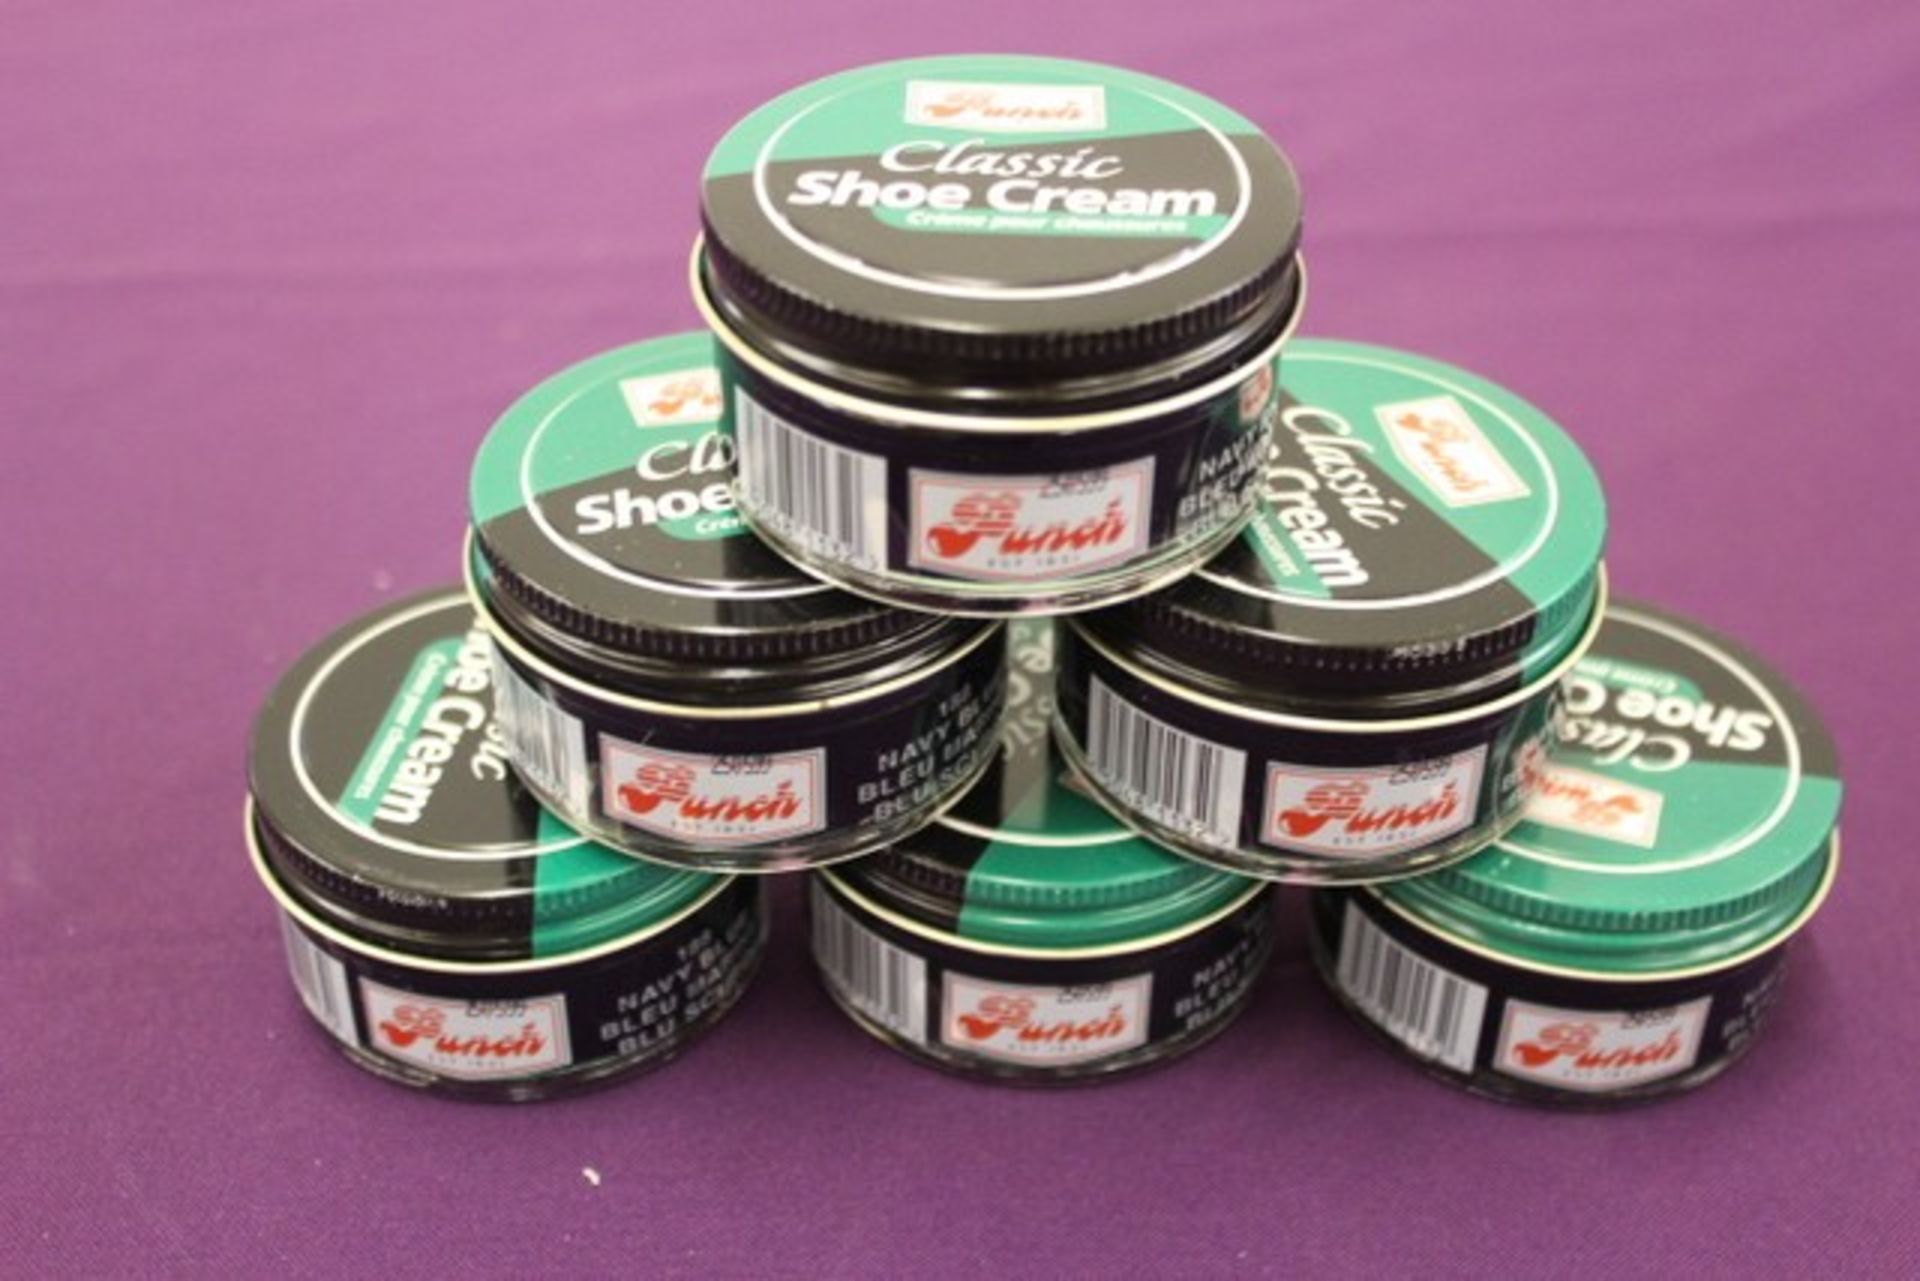 V Brand New Six Jars Of 50ml Punch Classic Shoe Cream Navy Blue (Photo May Vary From Item) ISP £19-